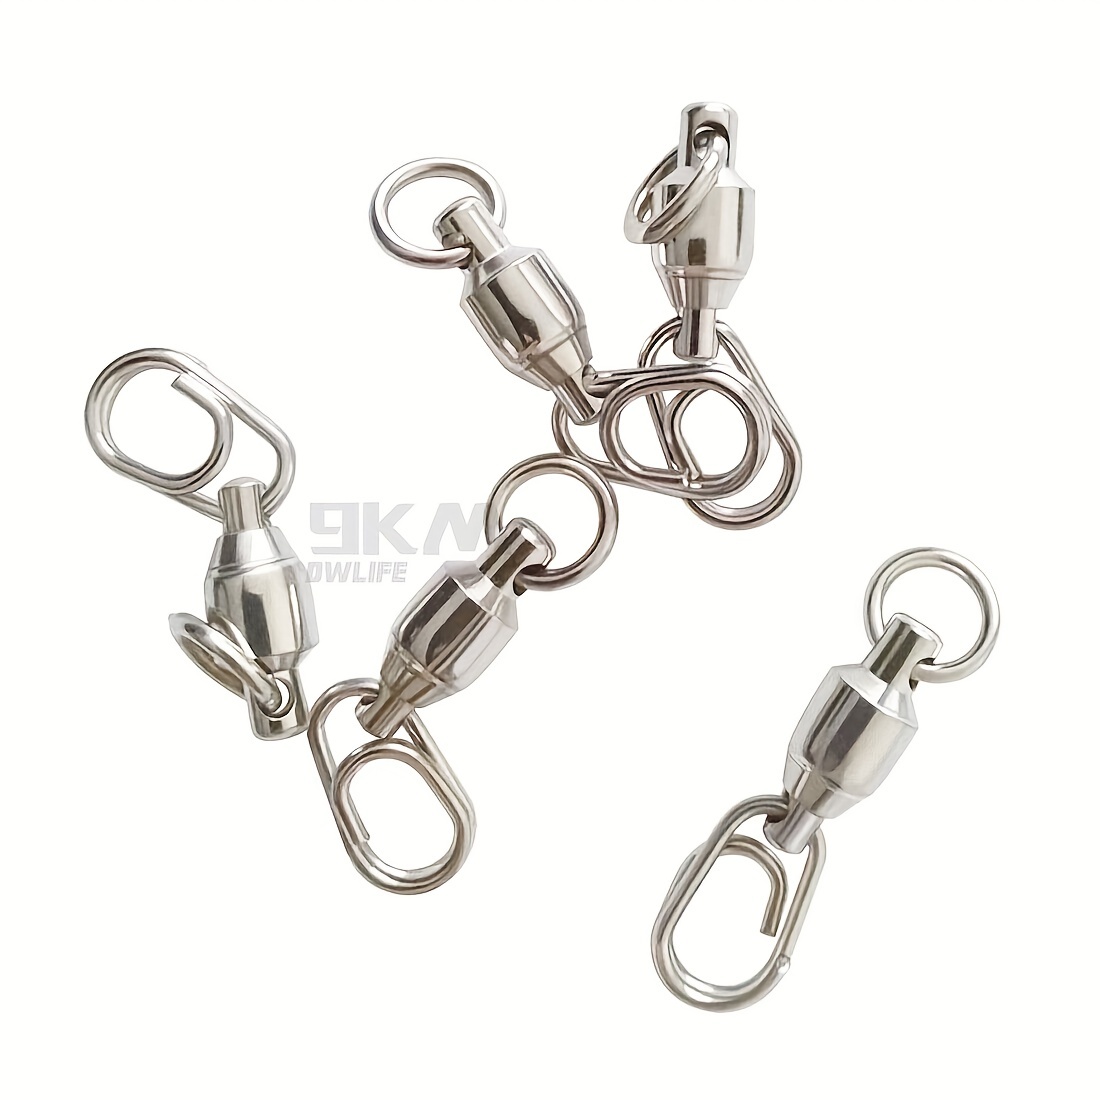 MNFT 30Pcs Stainless steel Fishing Fastach Clips Fishing Swivels Snaps  Swivel Rolling Snap Quick Connection Accessory